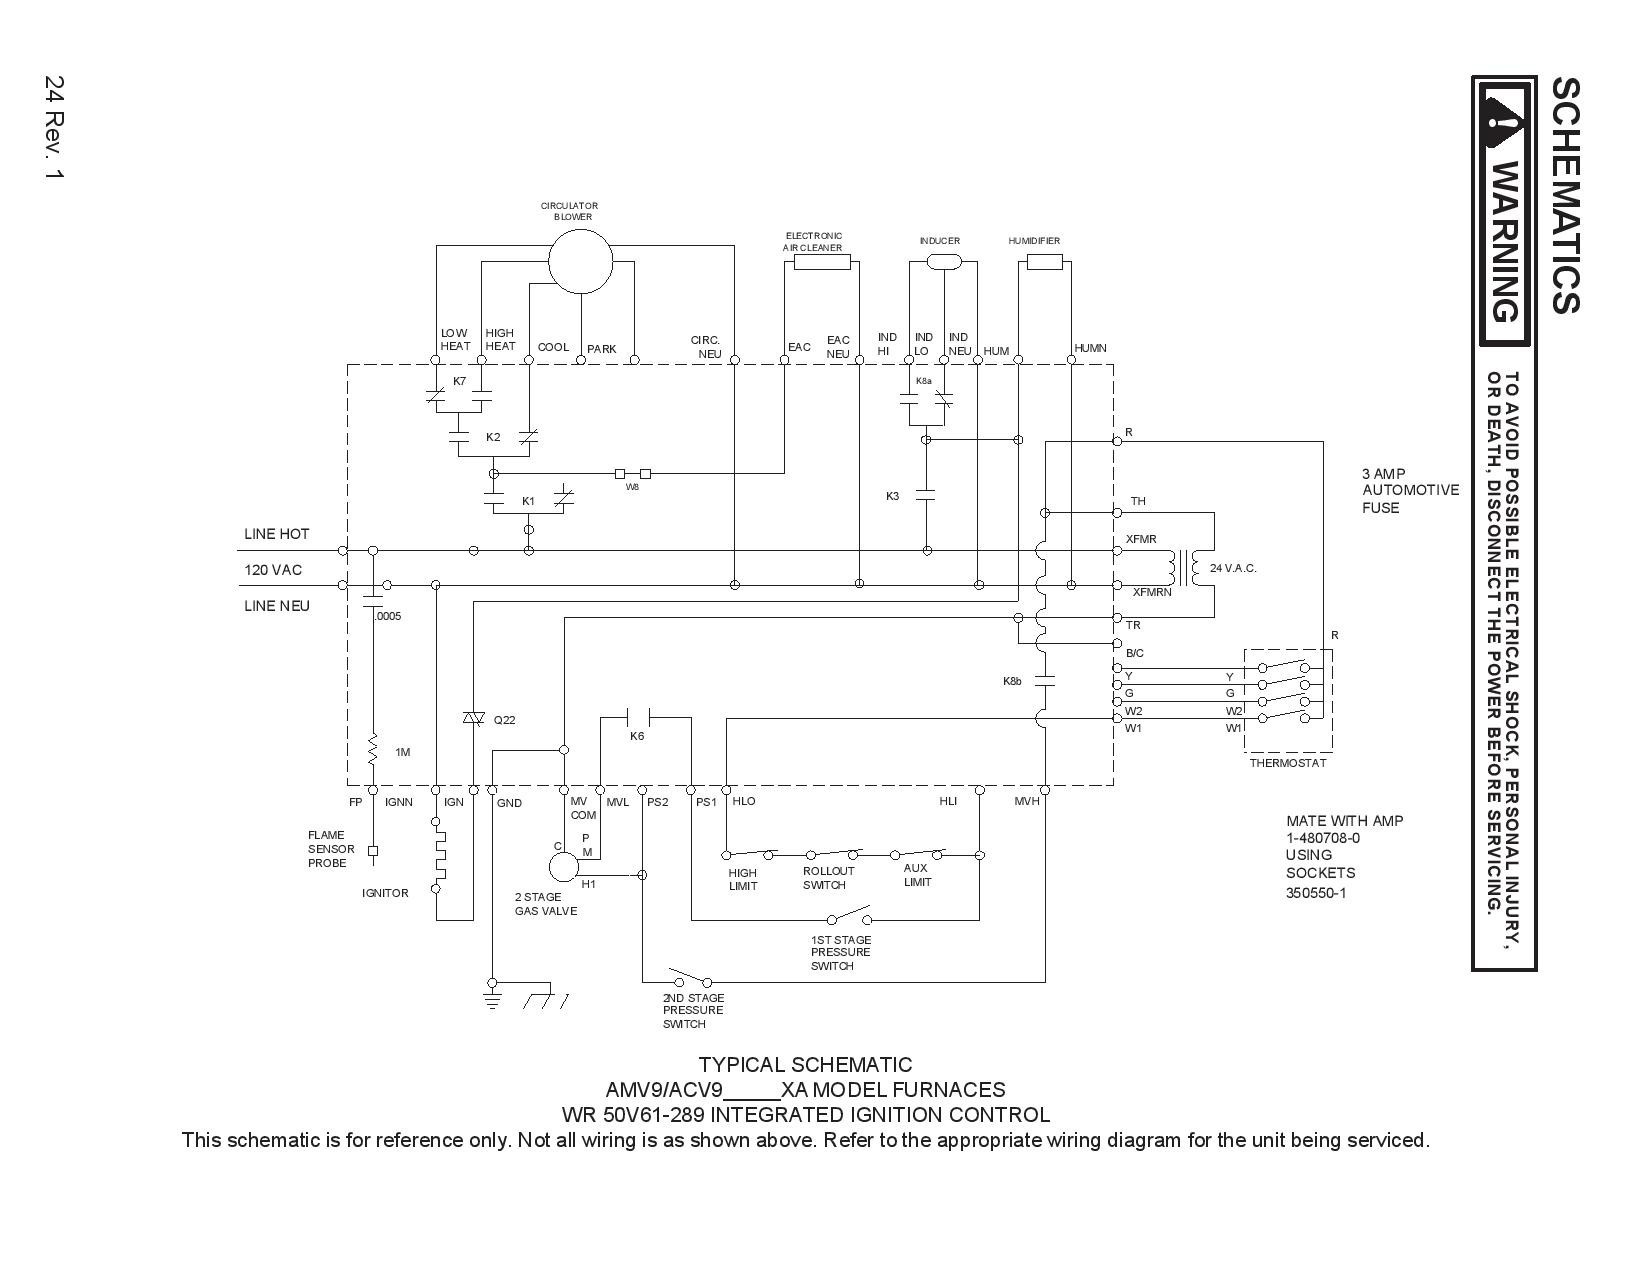 Ecobee3 Wiring Diagram Unique Hvac Wiring for Wifi thermostat Installation Ecobee Gas Furnace